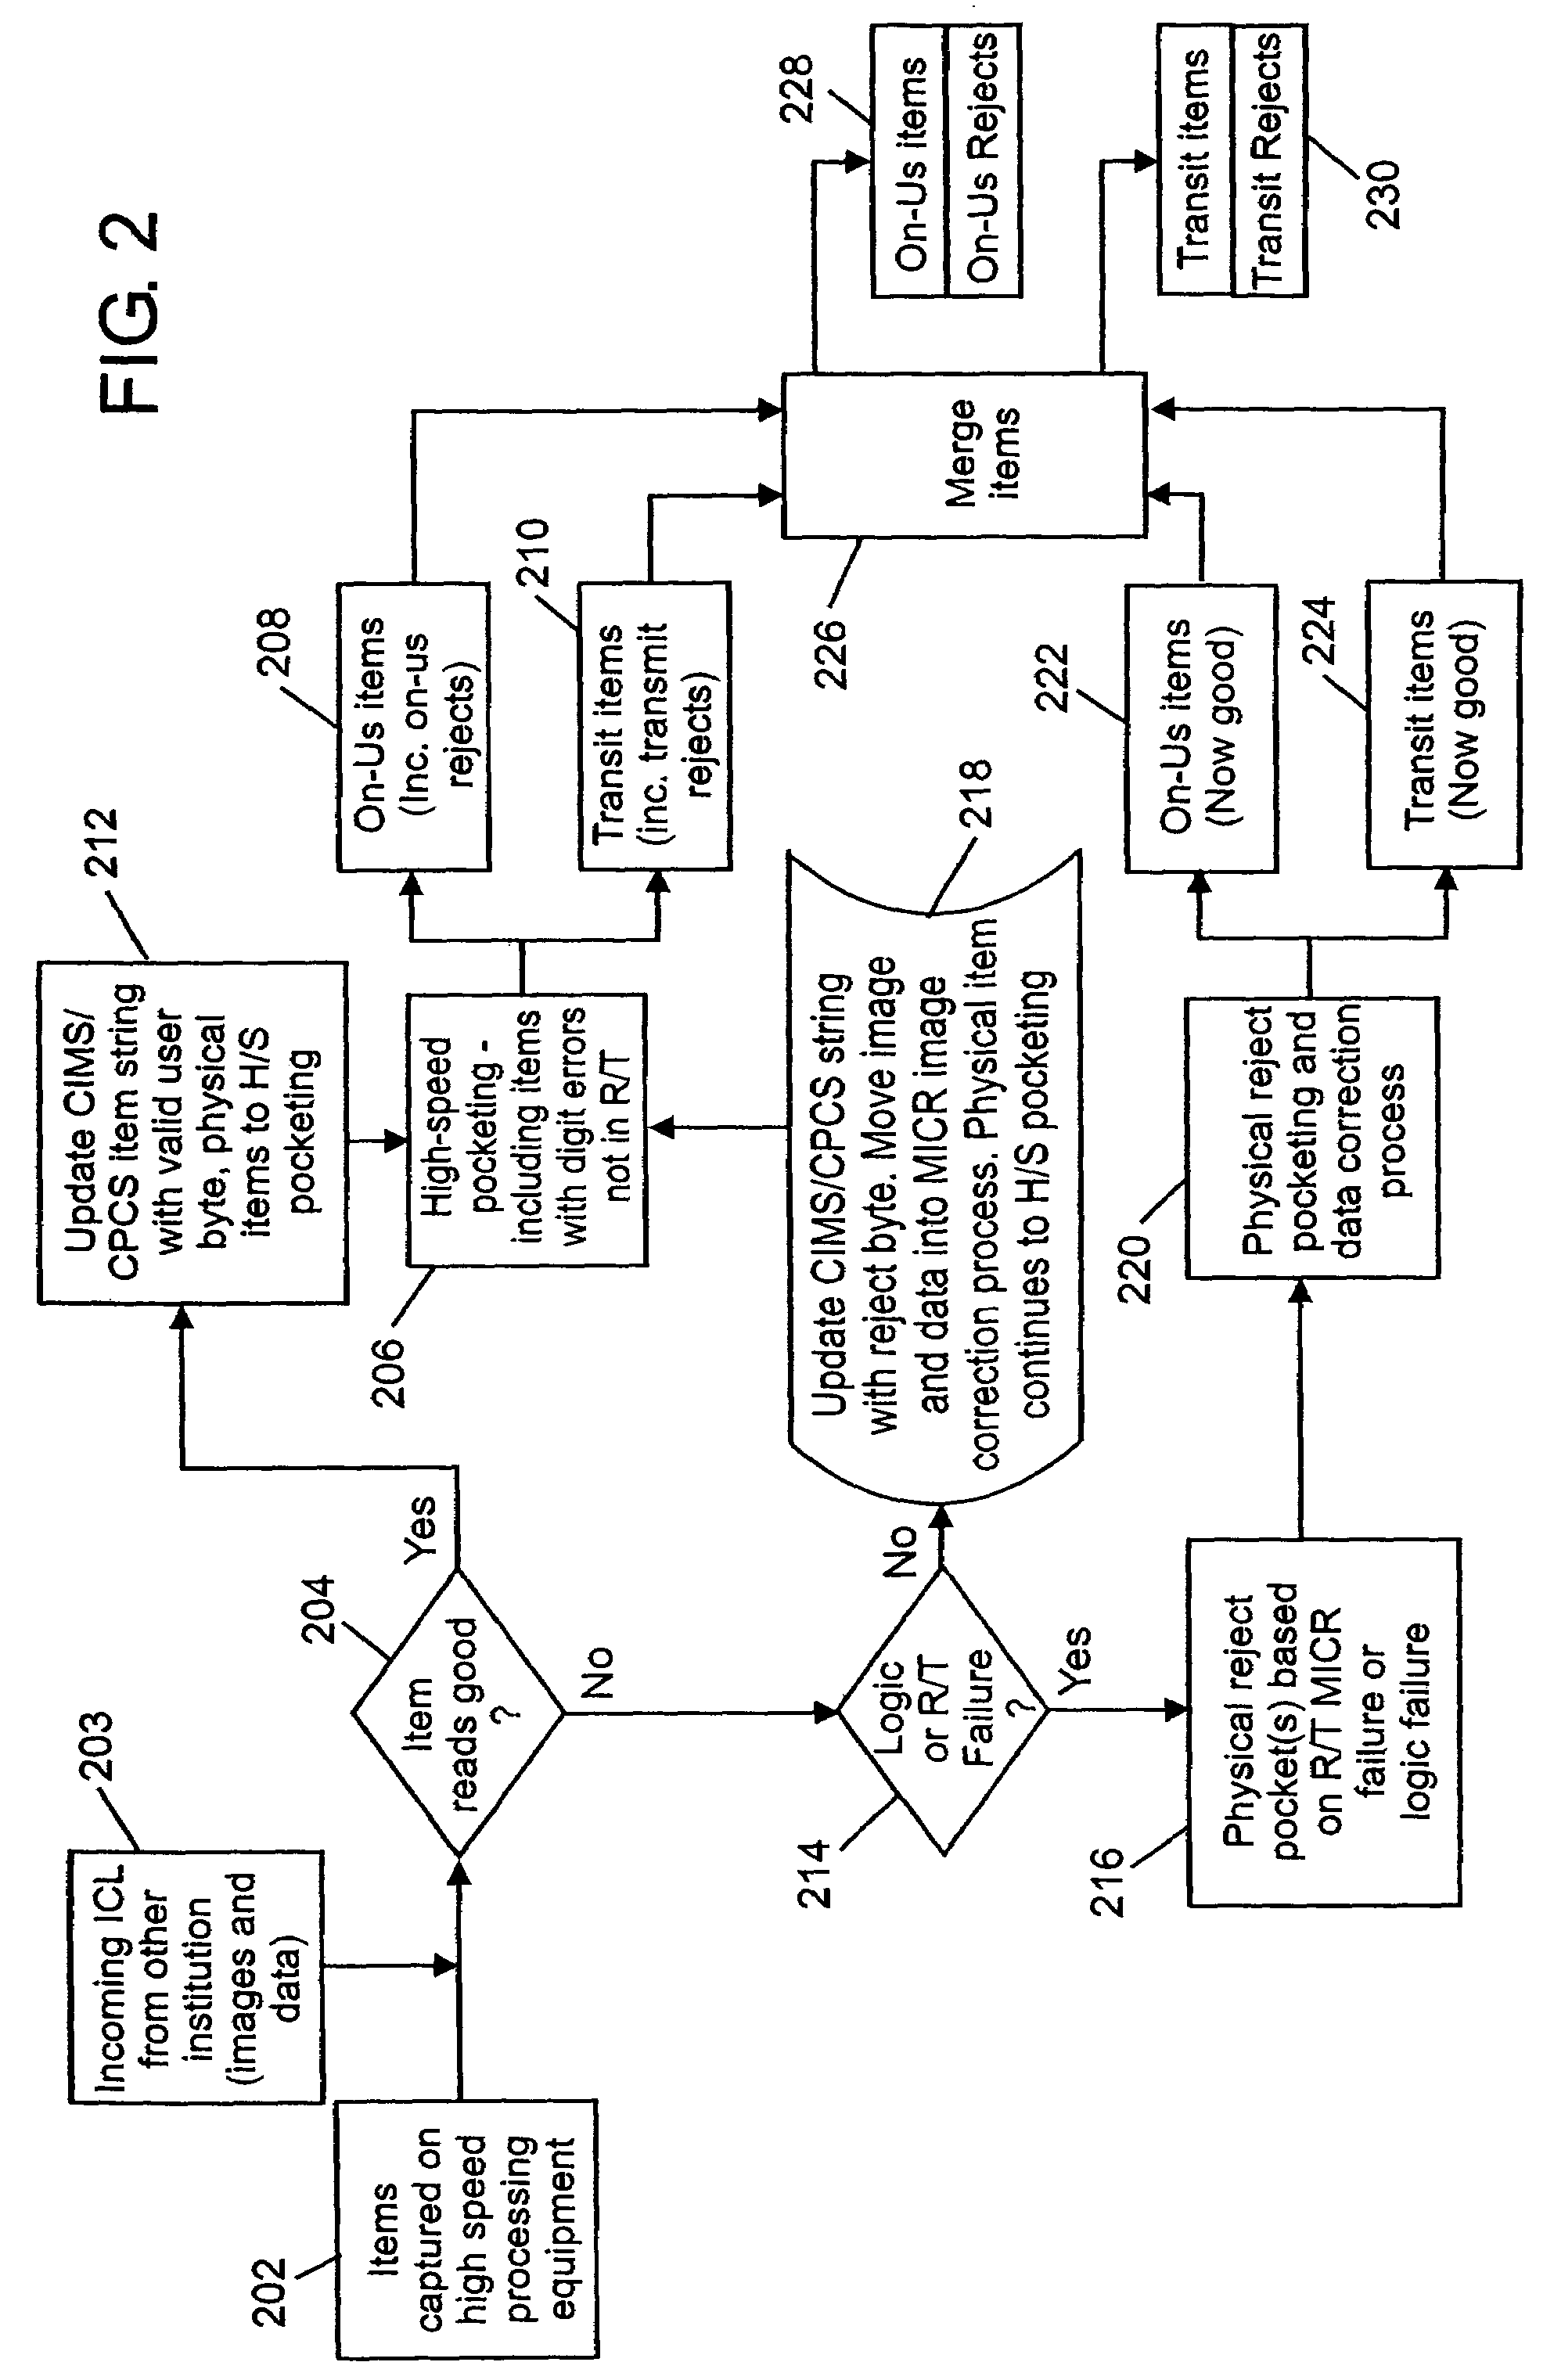 System and method for the processing of MICR documents that produce read errors